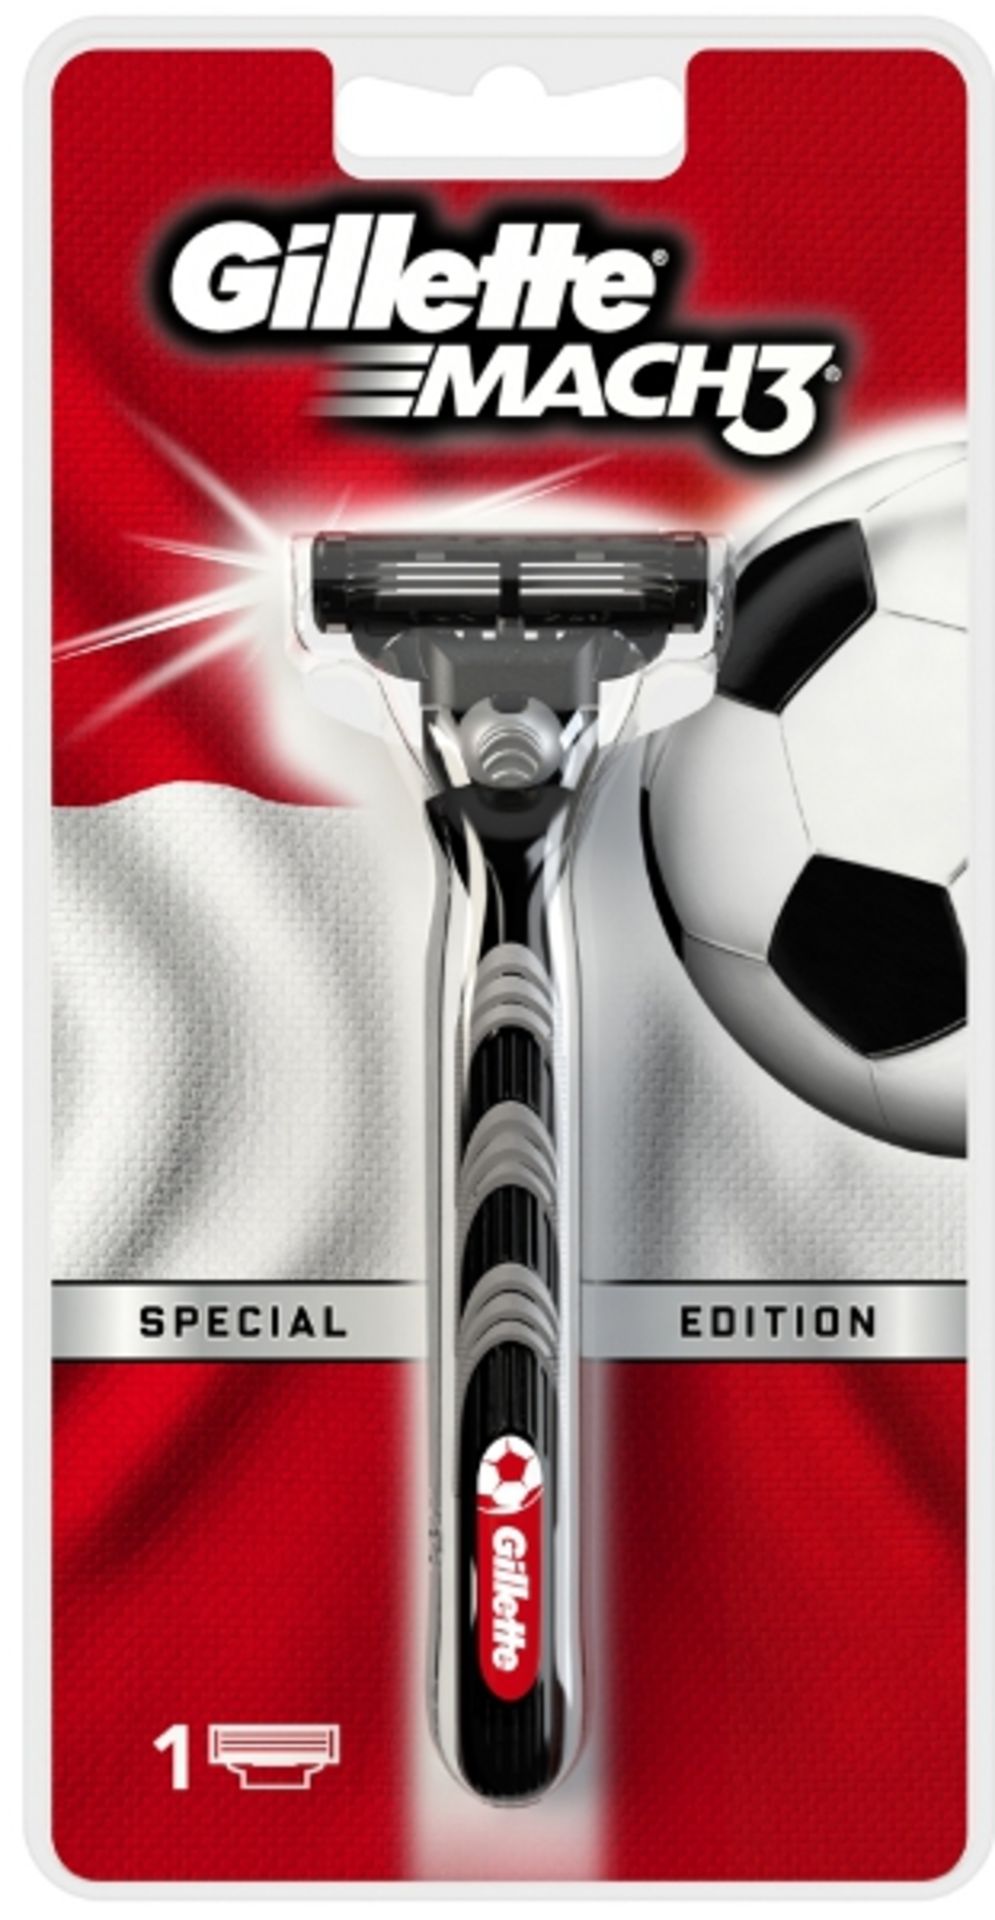 V *TRADE QTY* Brand New Gillette Mach3 Football Special Edition X 24 YOUR BID PRICE TO BE MULTIPLIED